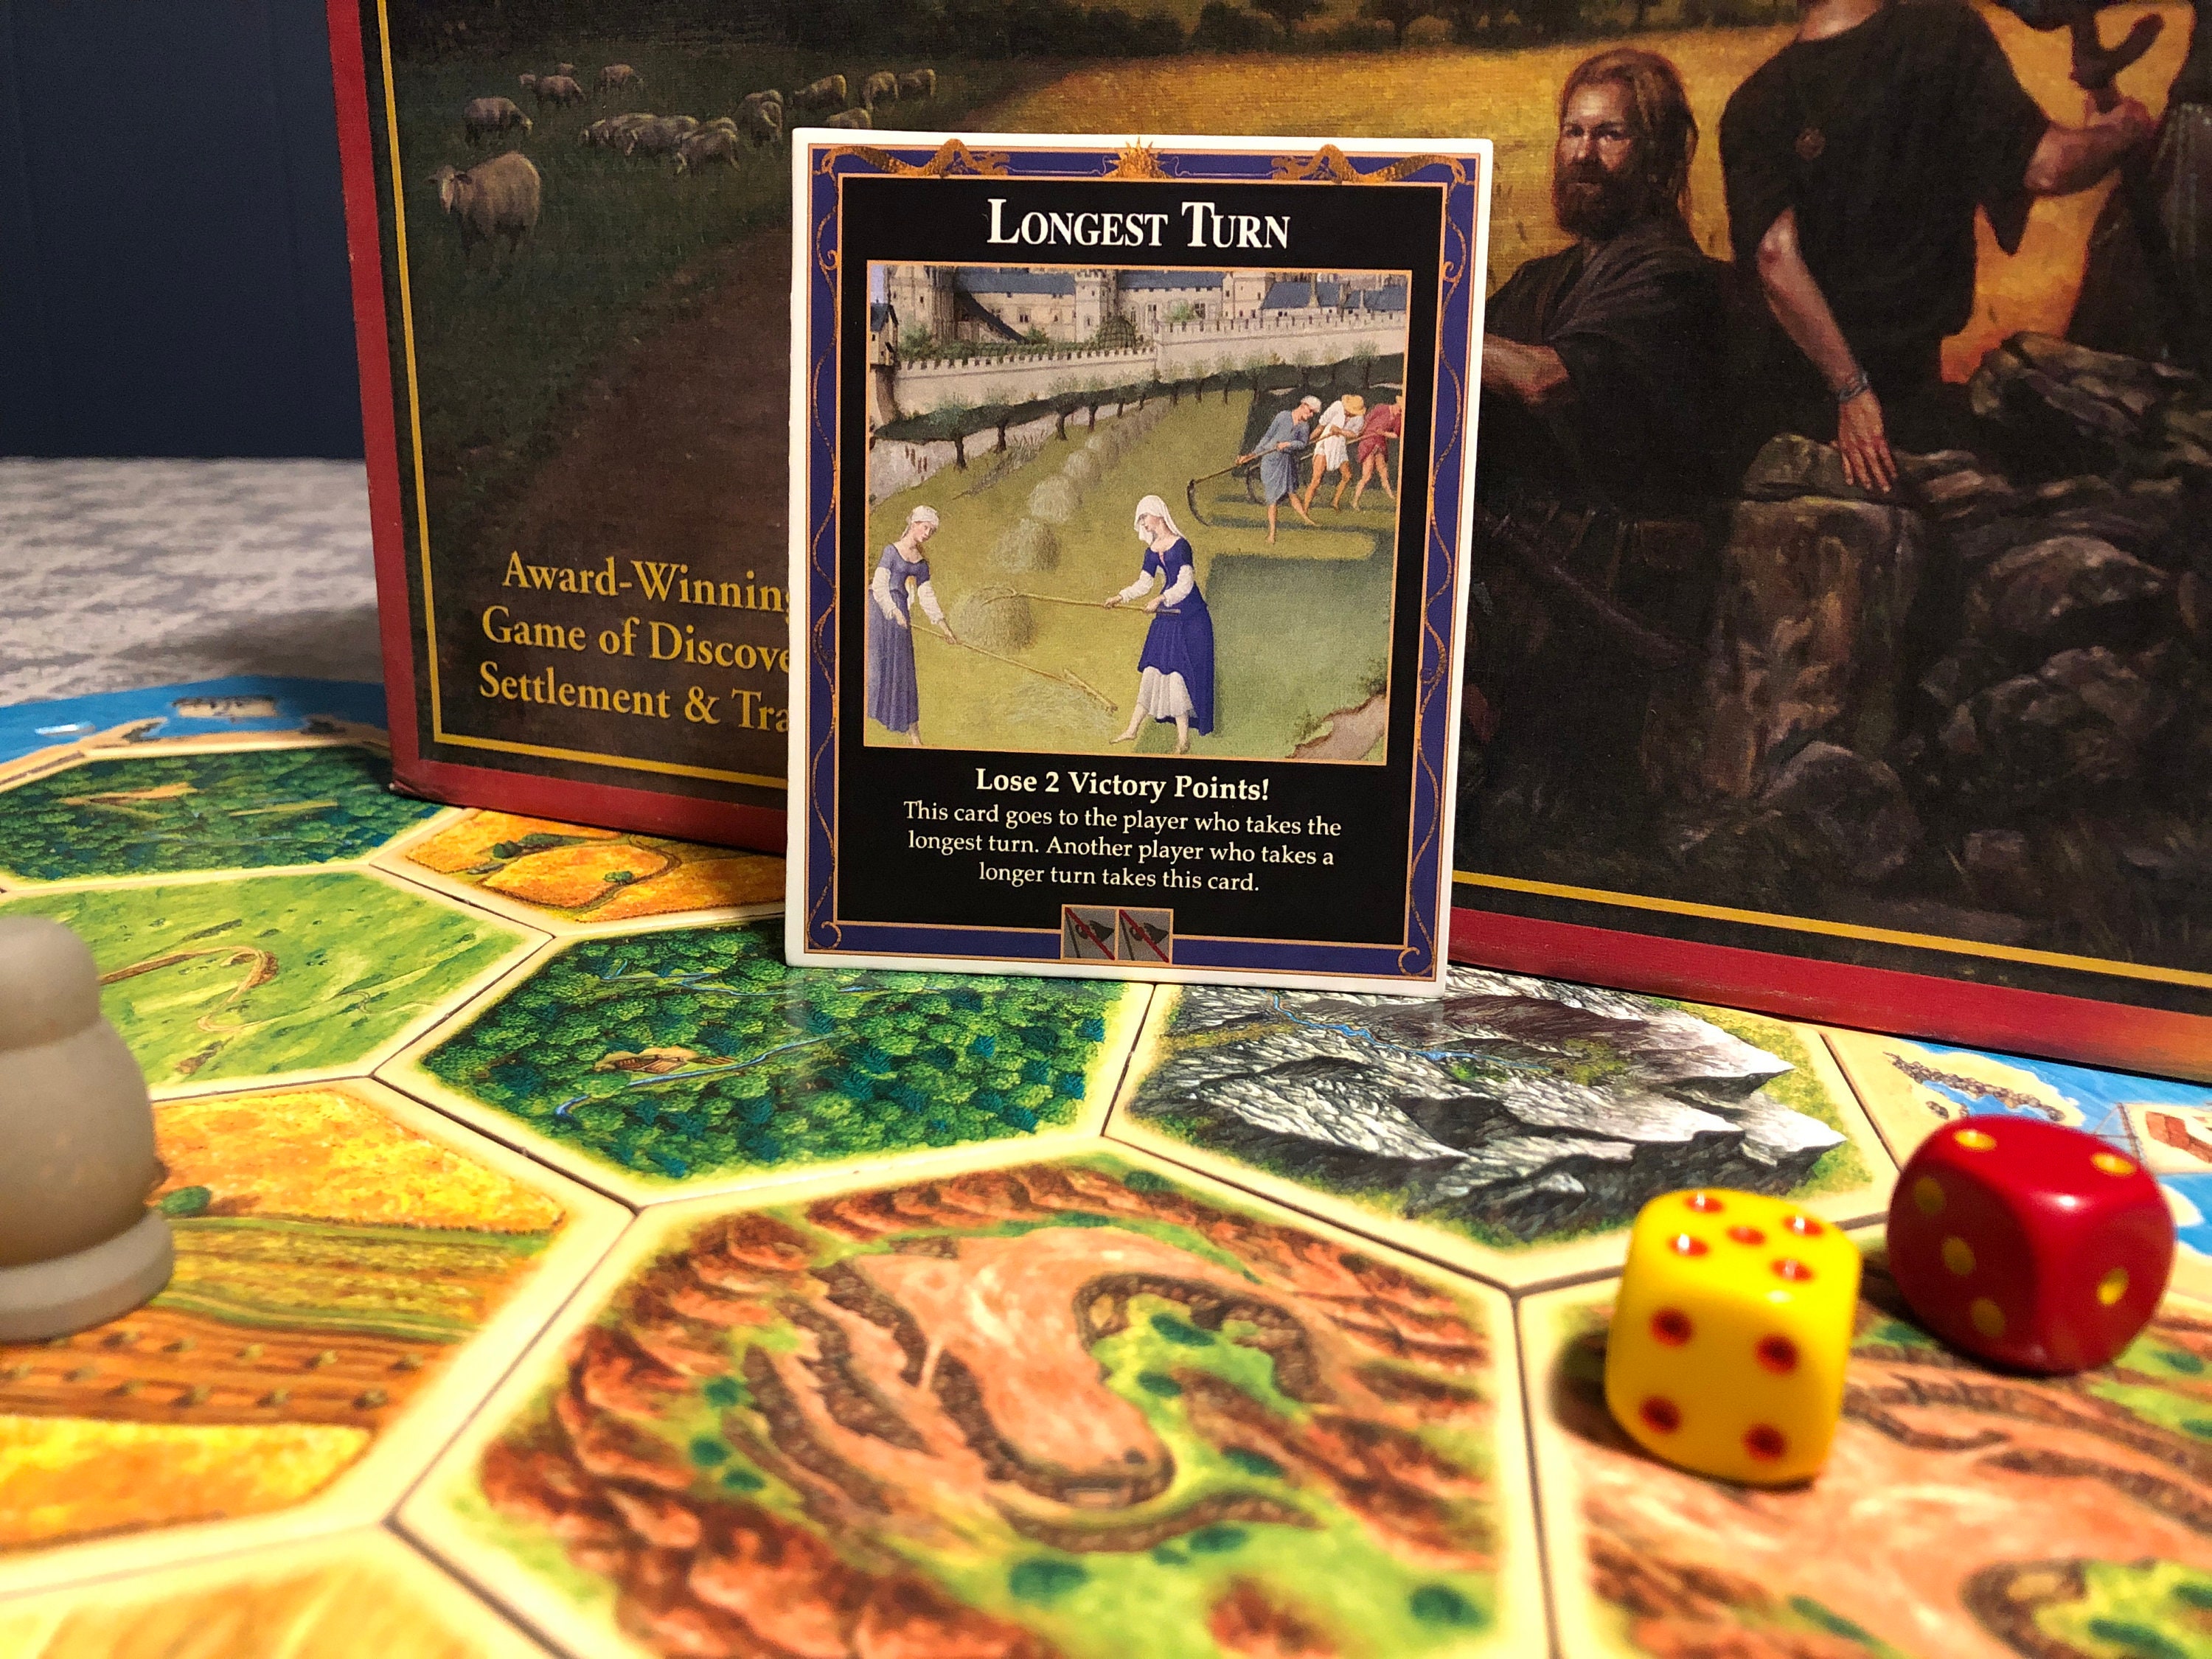 Around the World in Eighty Games: From Tarot to Tic-Tac-Toe, Catan to  Chutes and Ladders, a Mathematician Unlocks the Secrets of the World's  Greatest Games